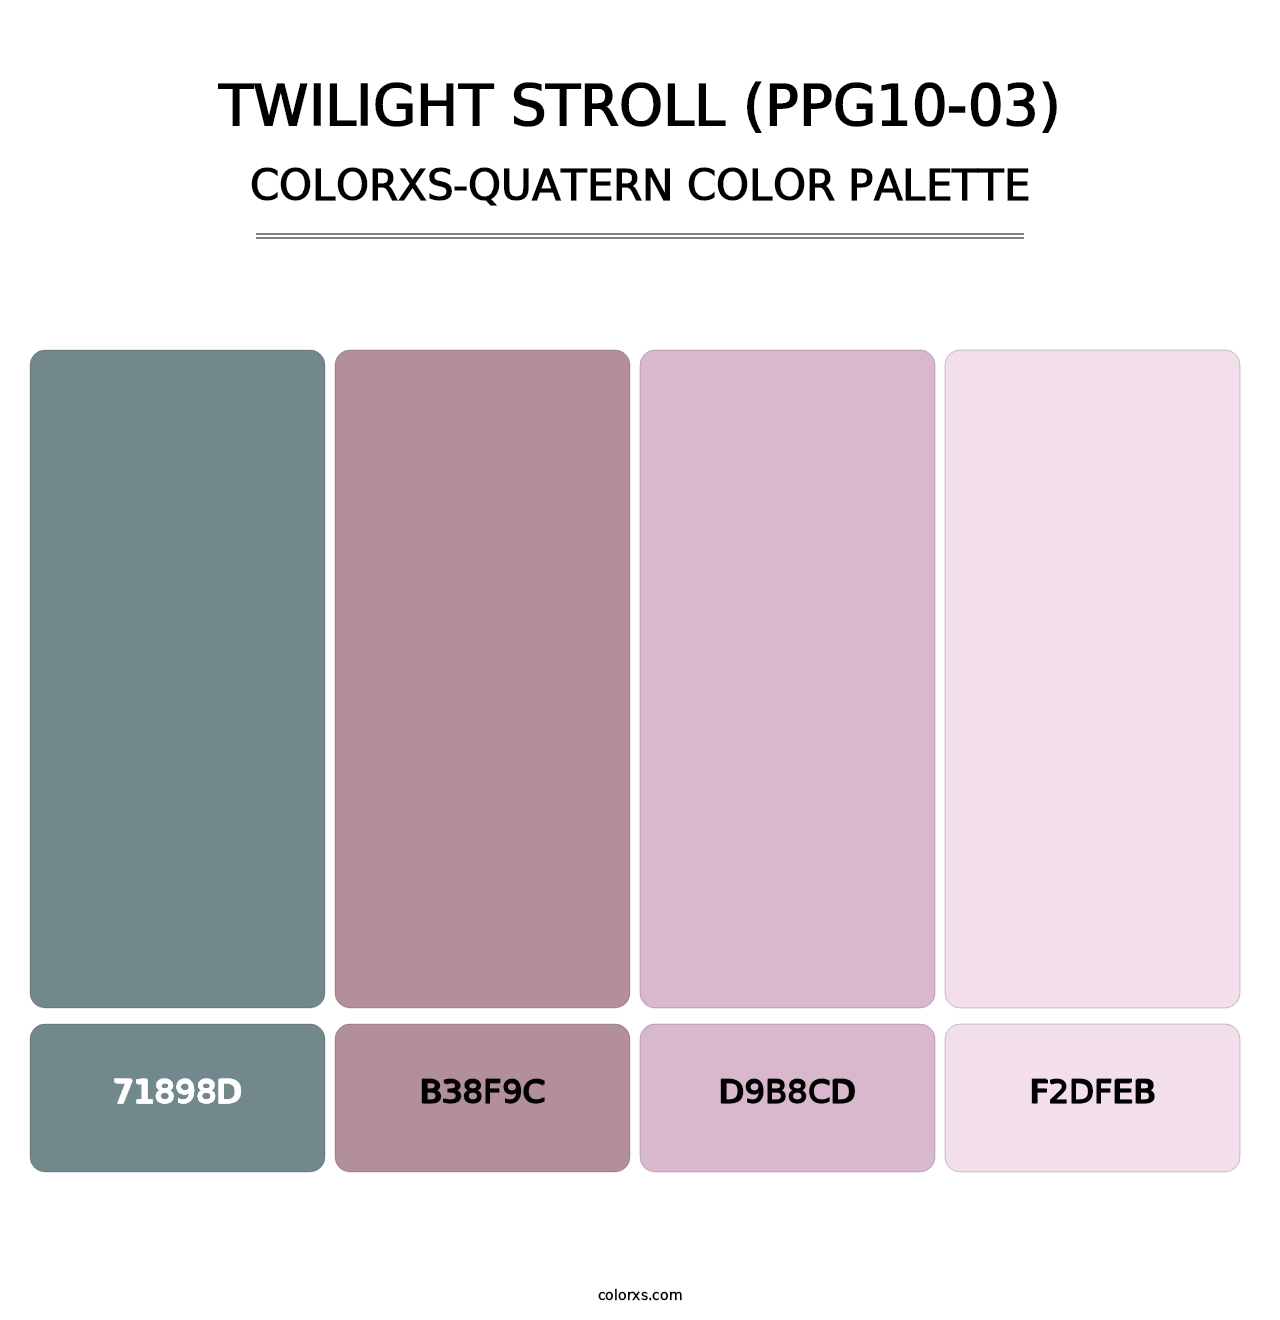 Twilight Stroll (PPG10-03) - Colorxs Quatern Palette